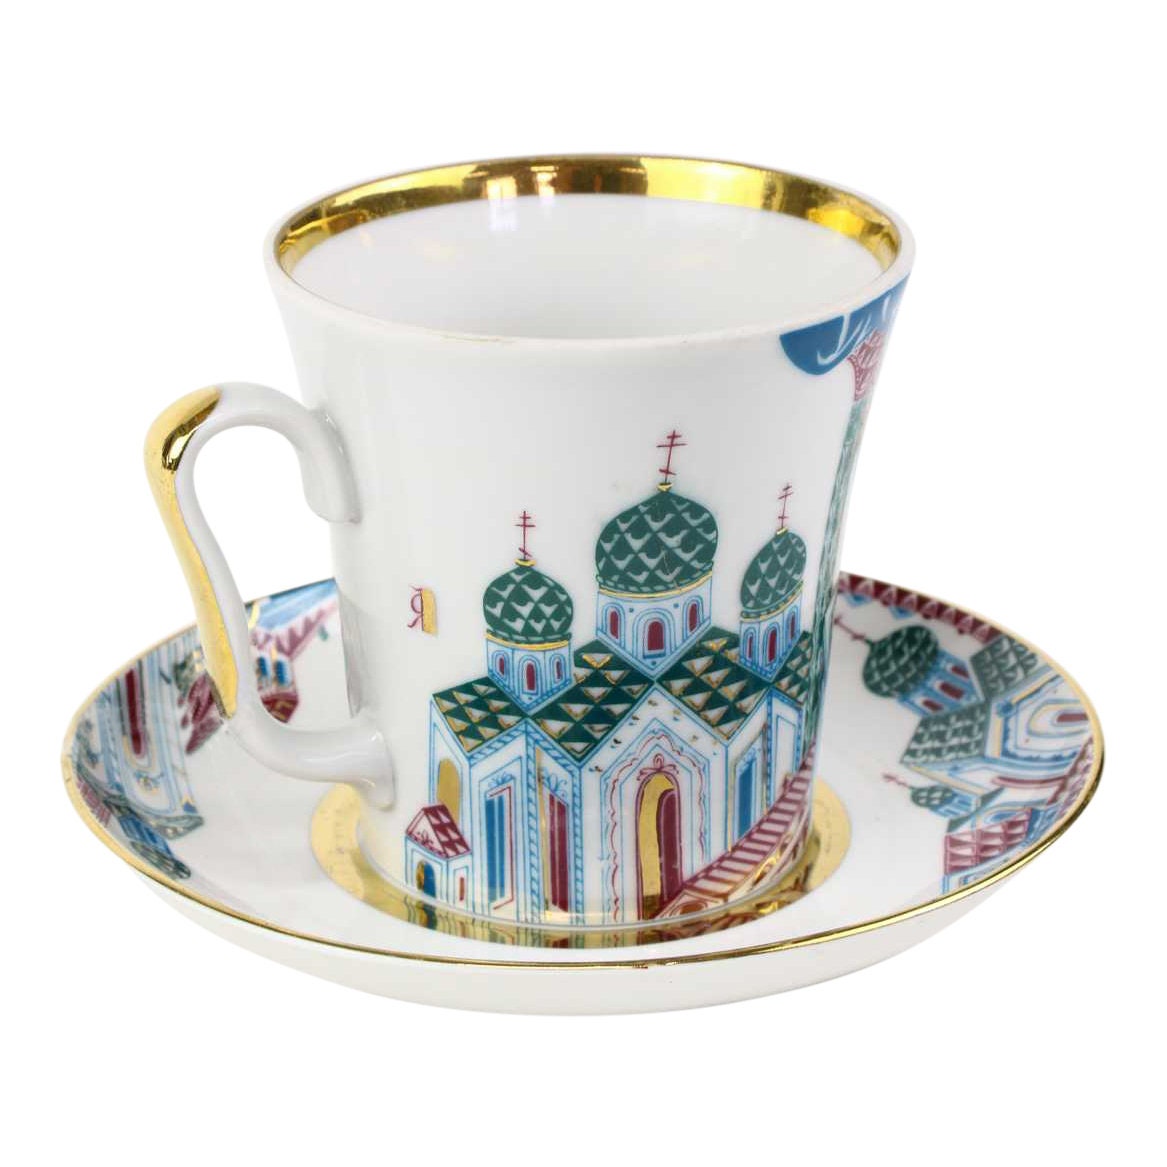 Russian Tea Cup and Saucer - Etsy